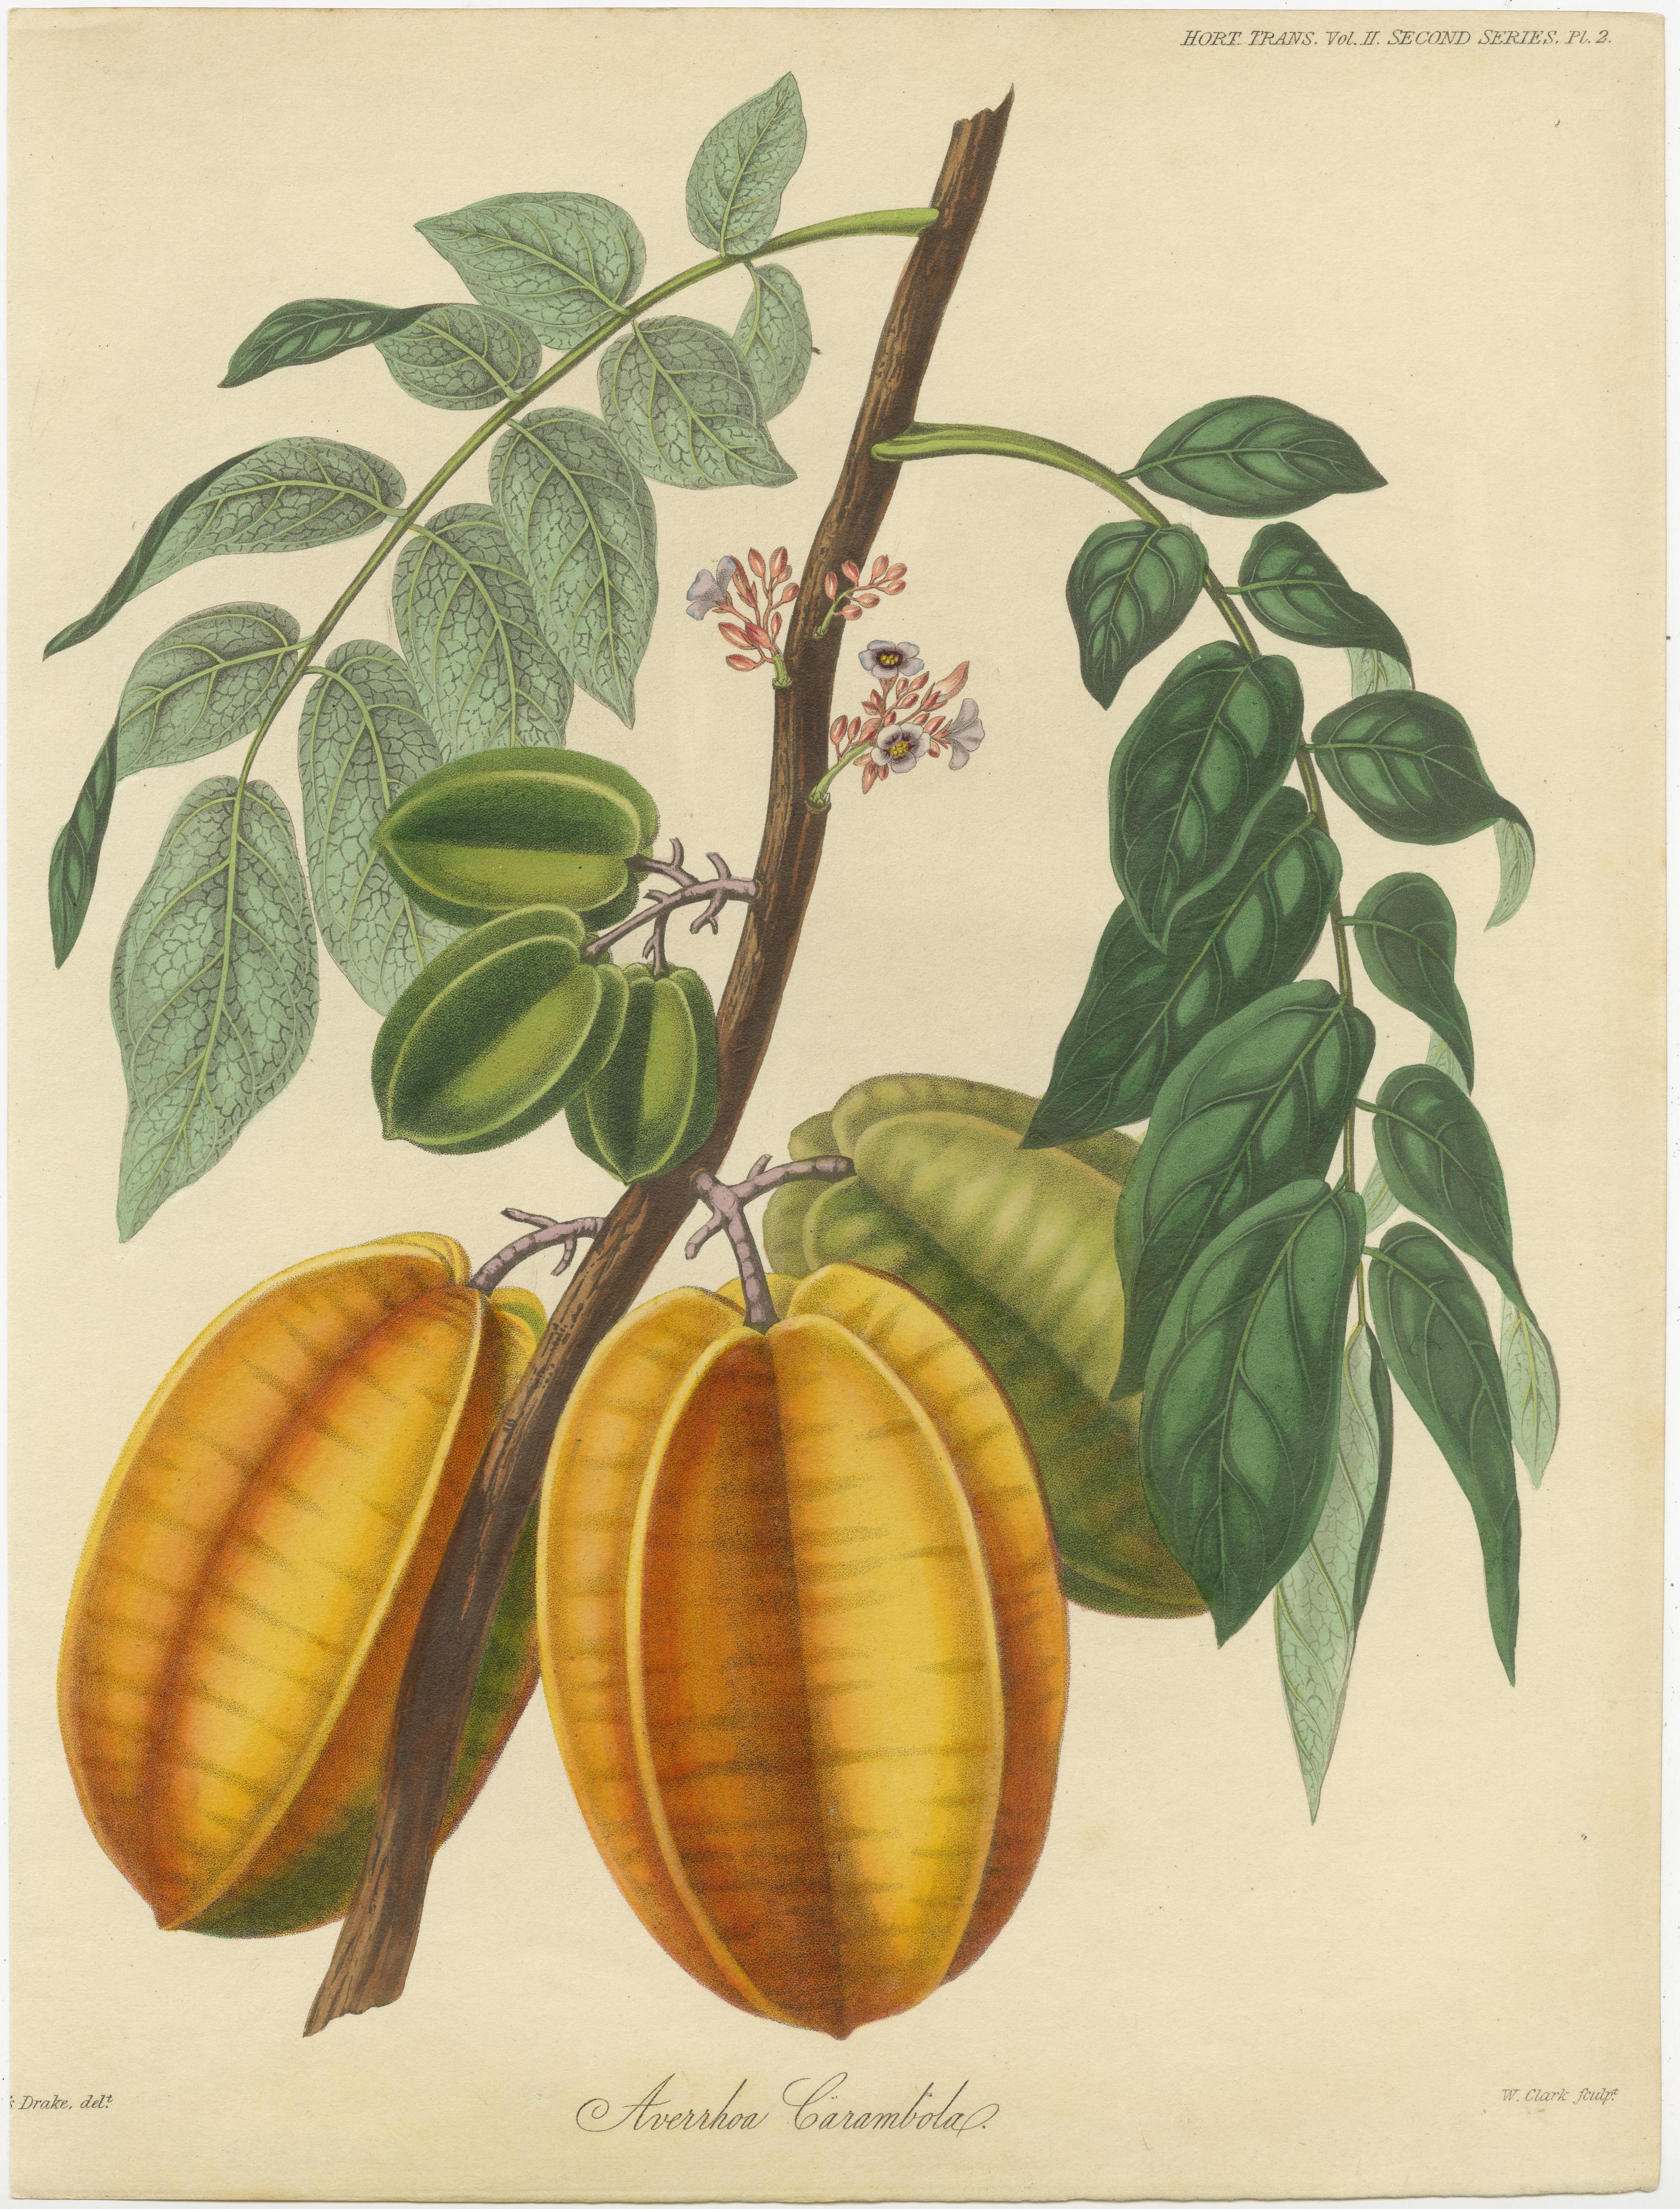 Antique print titled 'Averrhoa Carambola'. This print originates from 'Transactions of the Horticultural Society of London' published circa 1835.

In Transactions of the Horticultural Society of London we find some of the most beautifully